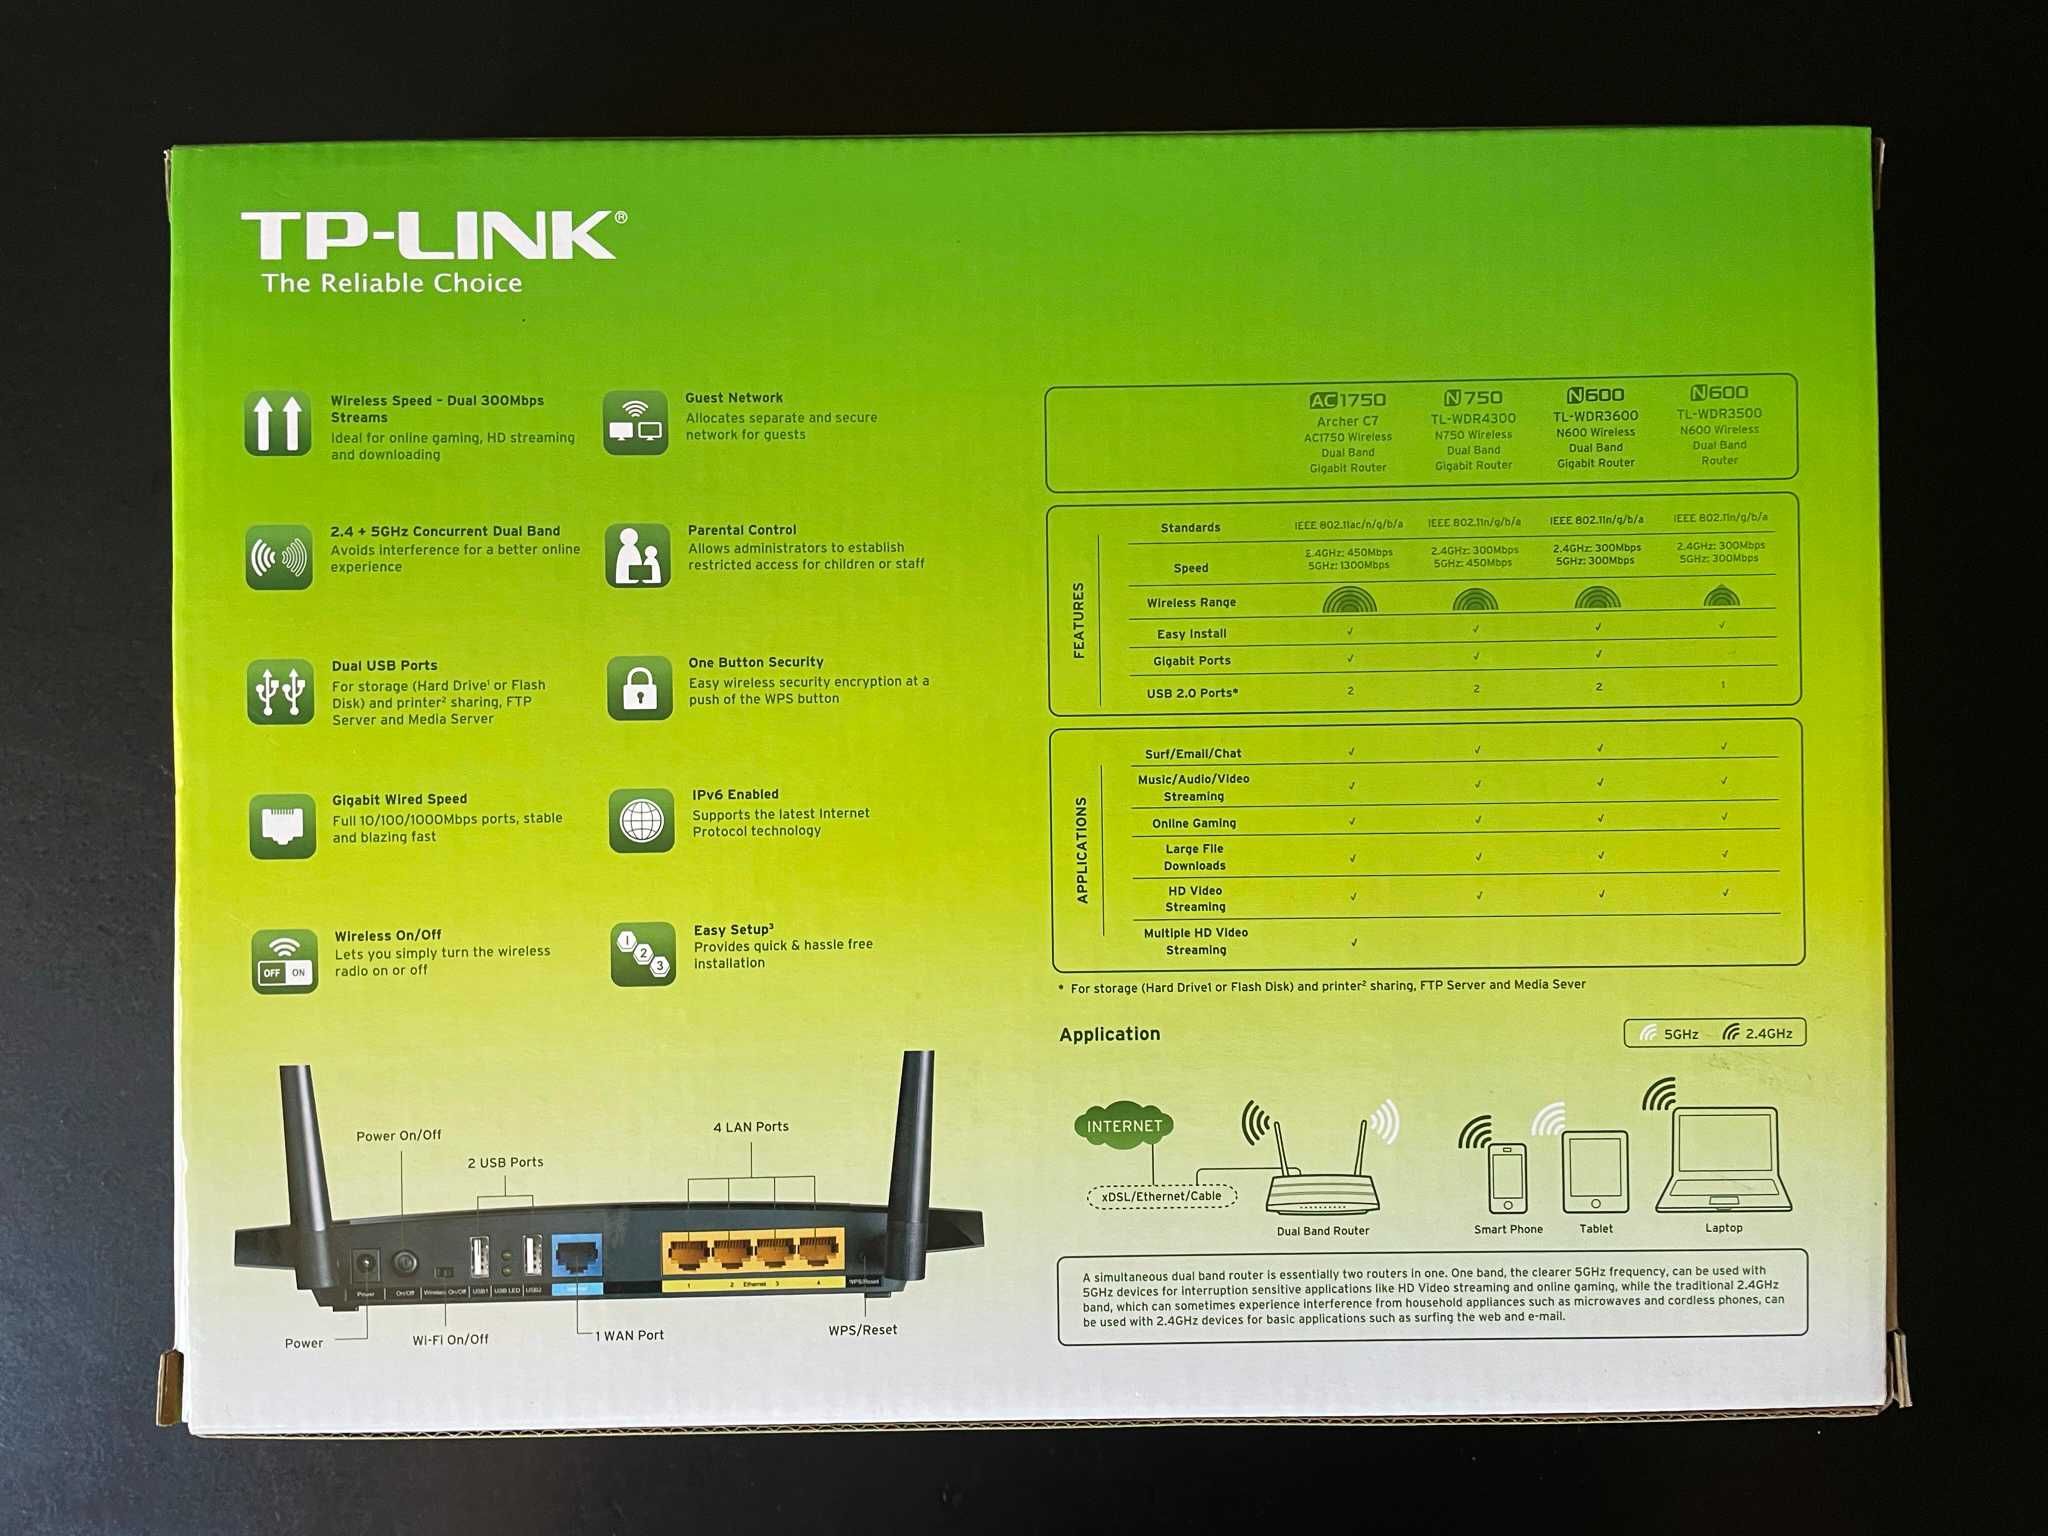 TP-Link N600 Wireless Dual Band Gigabit Router (TL-WDR3600)